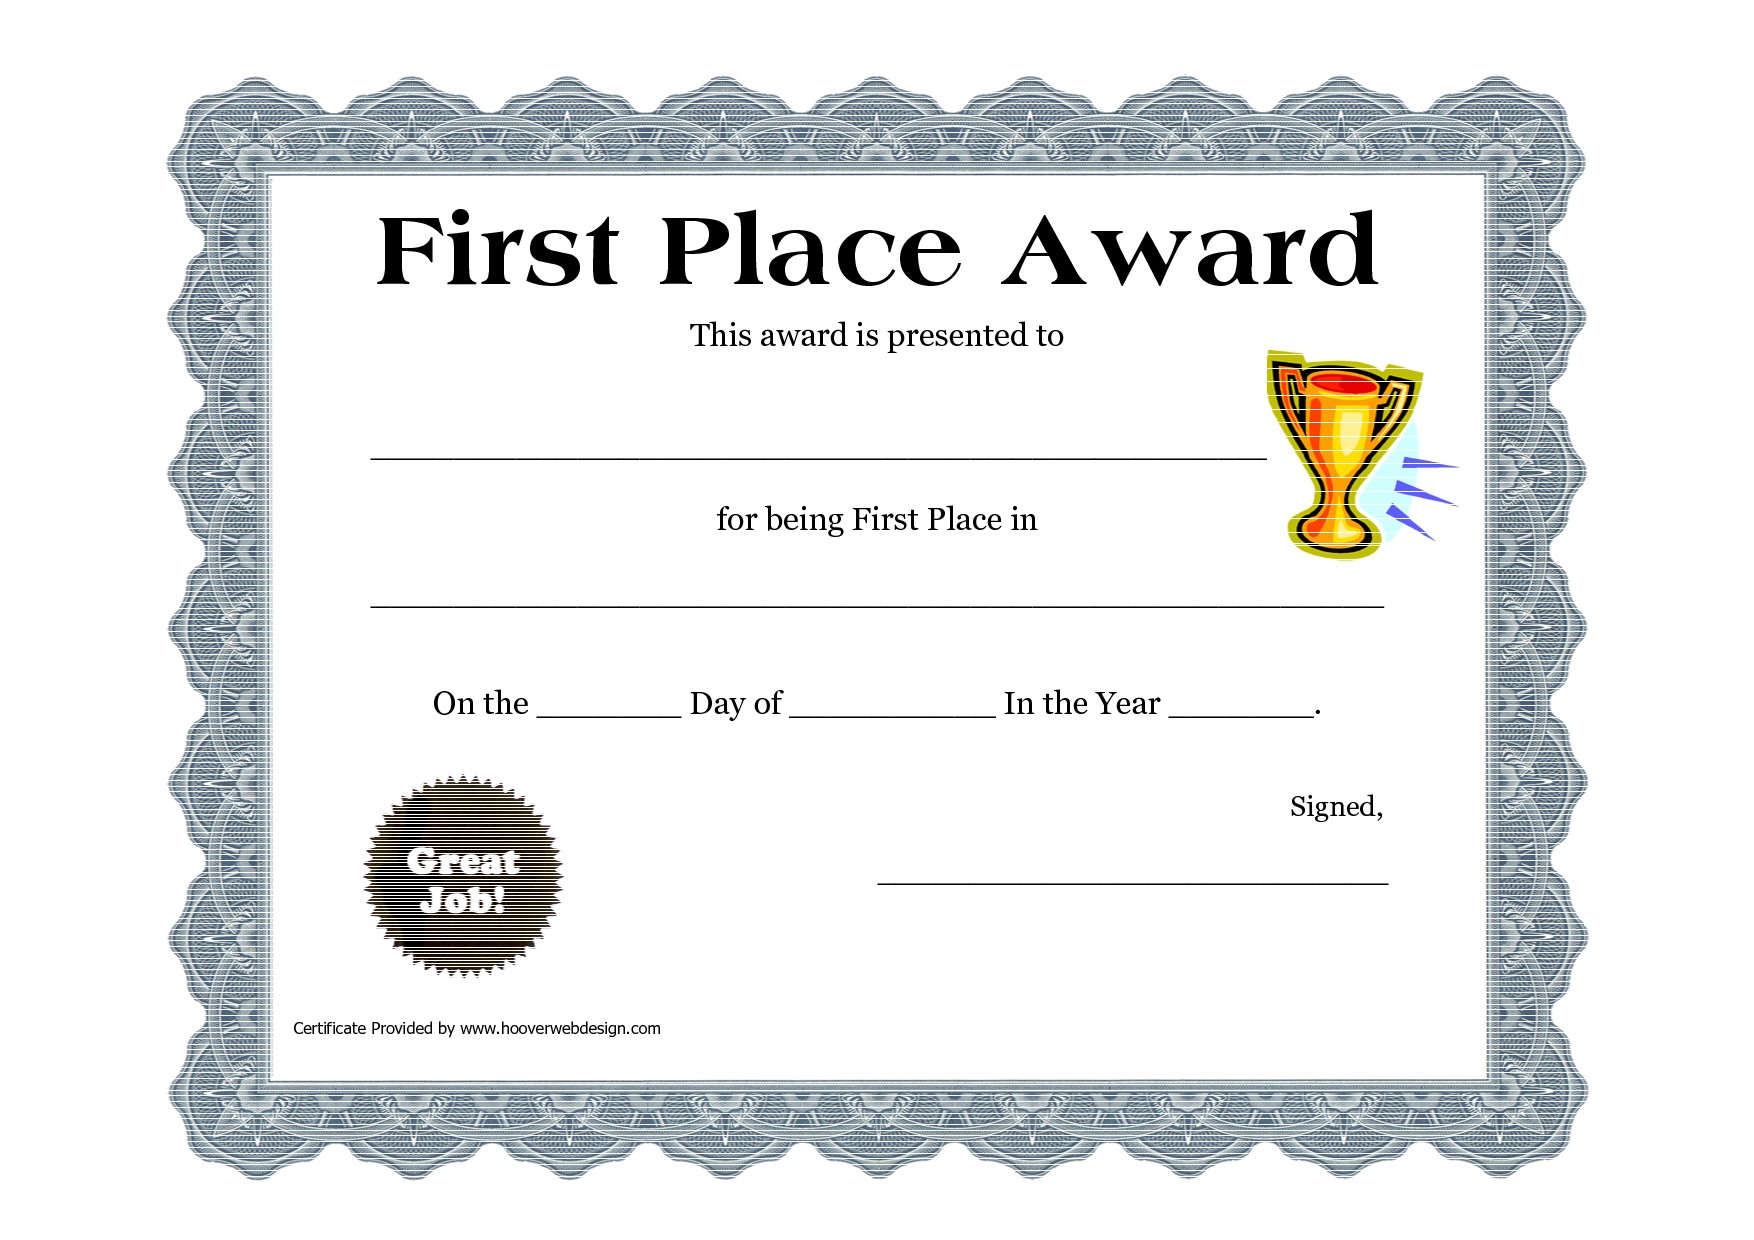 First Place Award Certificate carlynstudio us